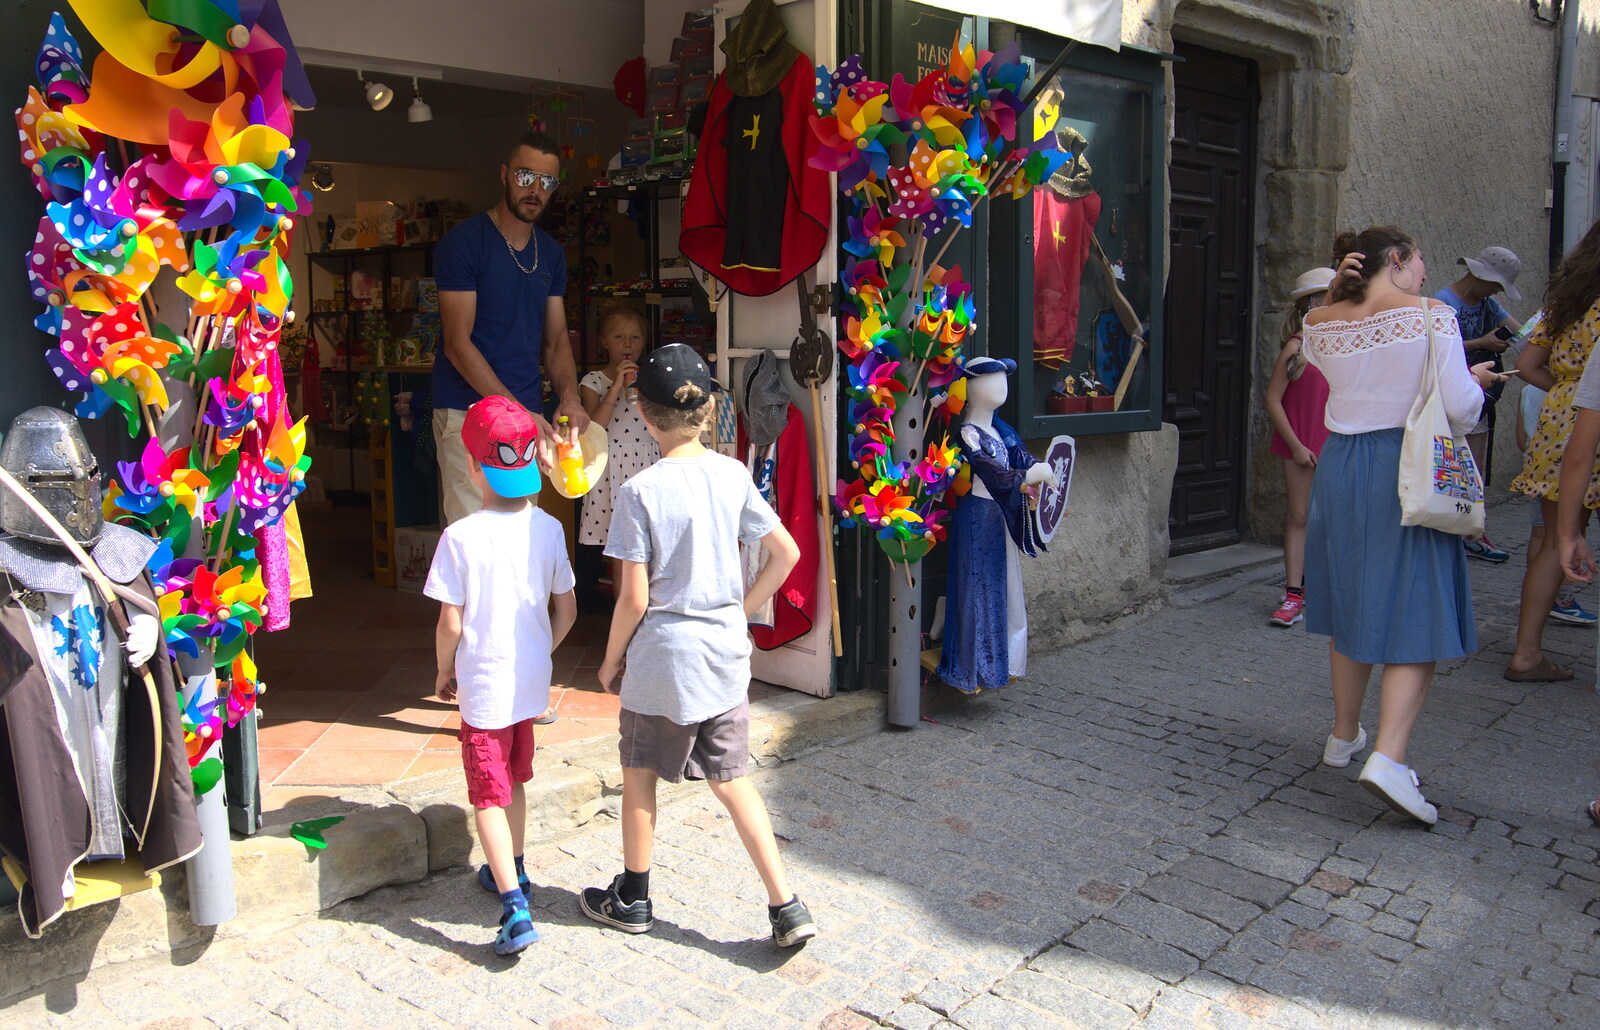 The boys find a toy shop from A Trip to Carcassonne, Aude, France - 8th August 2018